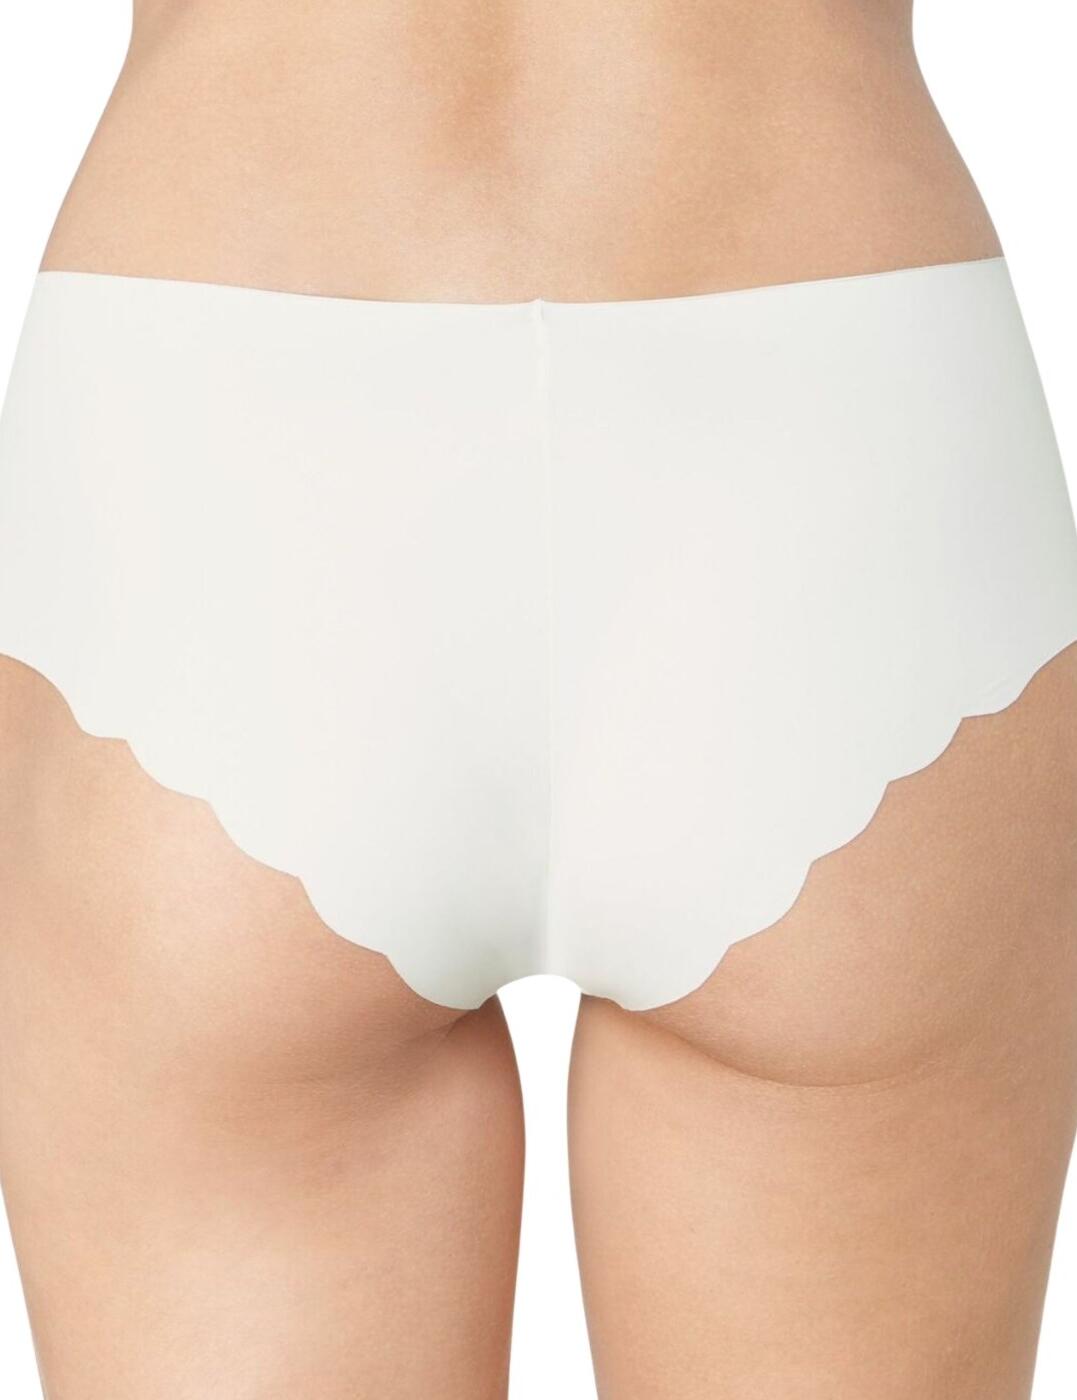 Details about   Sloggi Zero Feel Microfibre Short Brief 10184929 New Womens Everyday Knickers 